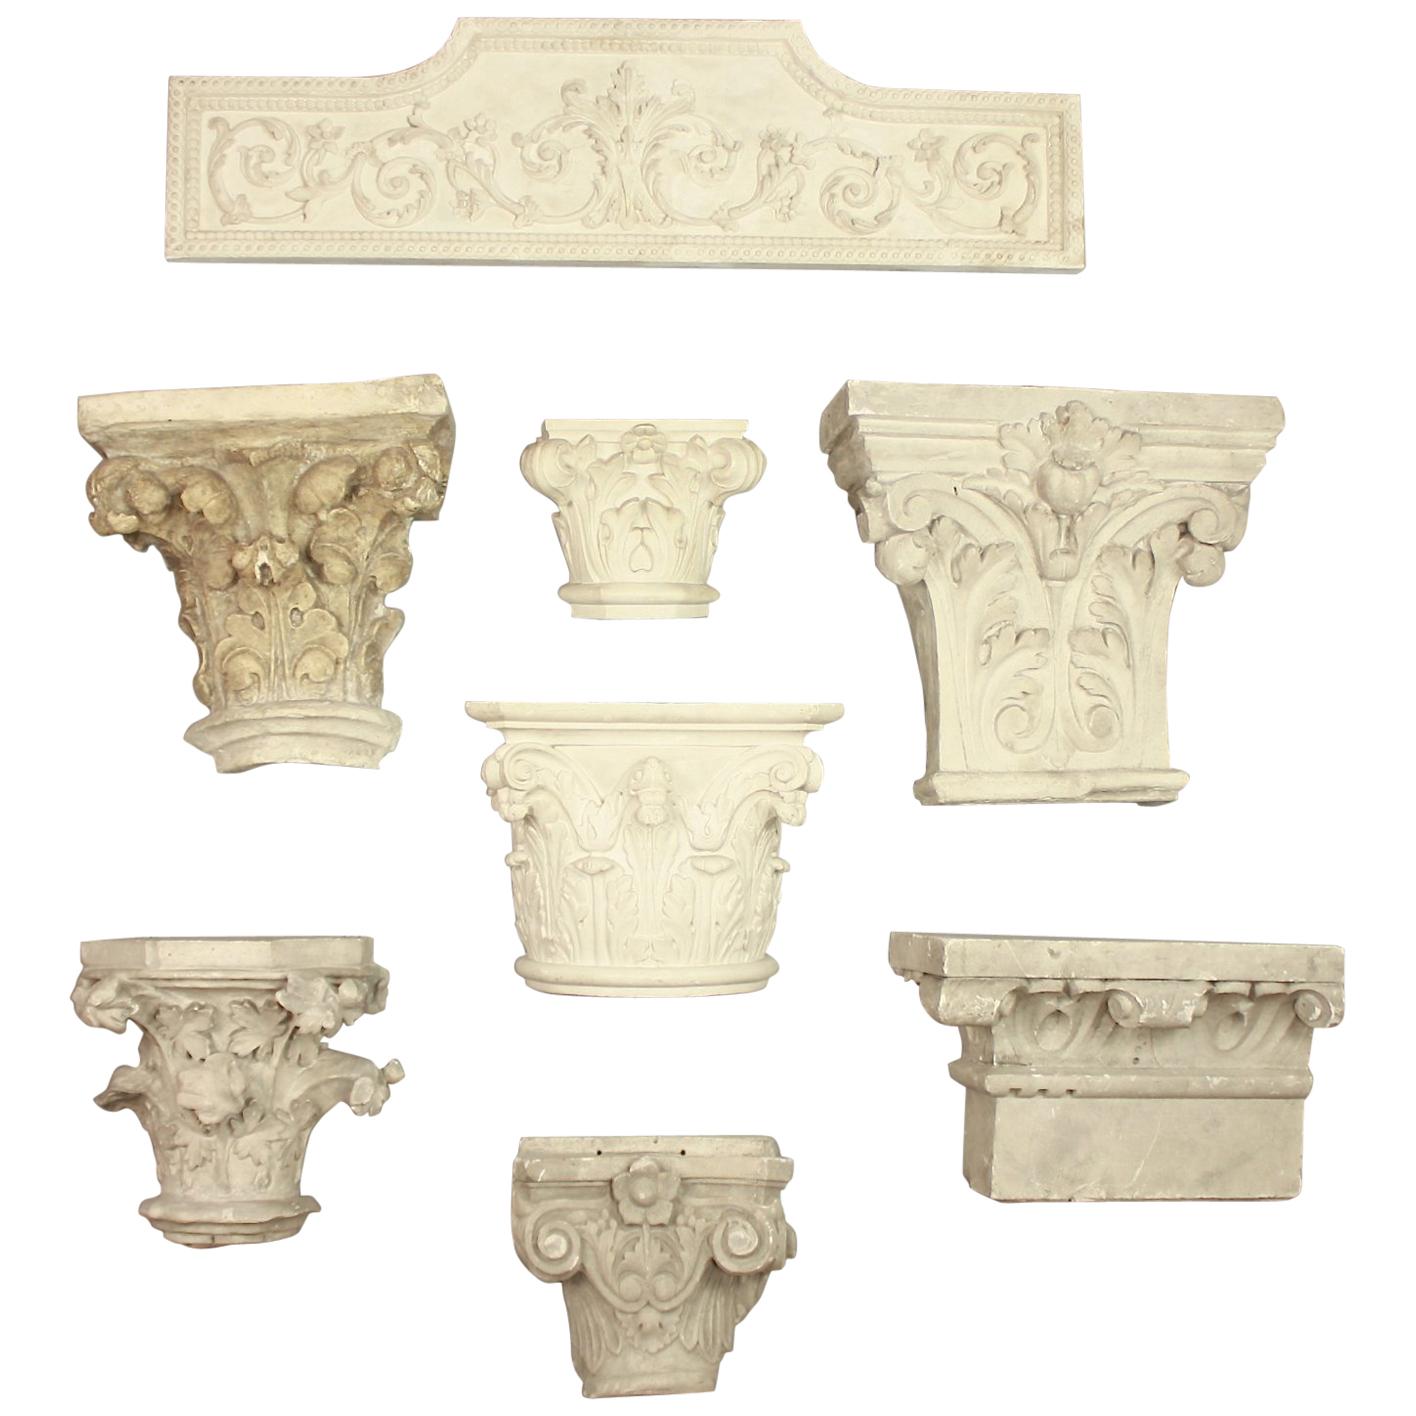 Collection of 19th Century Plaster Casts of Architectural Elements